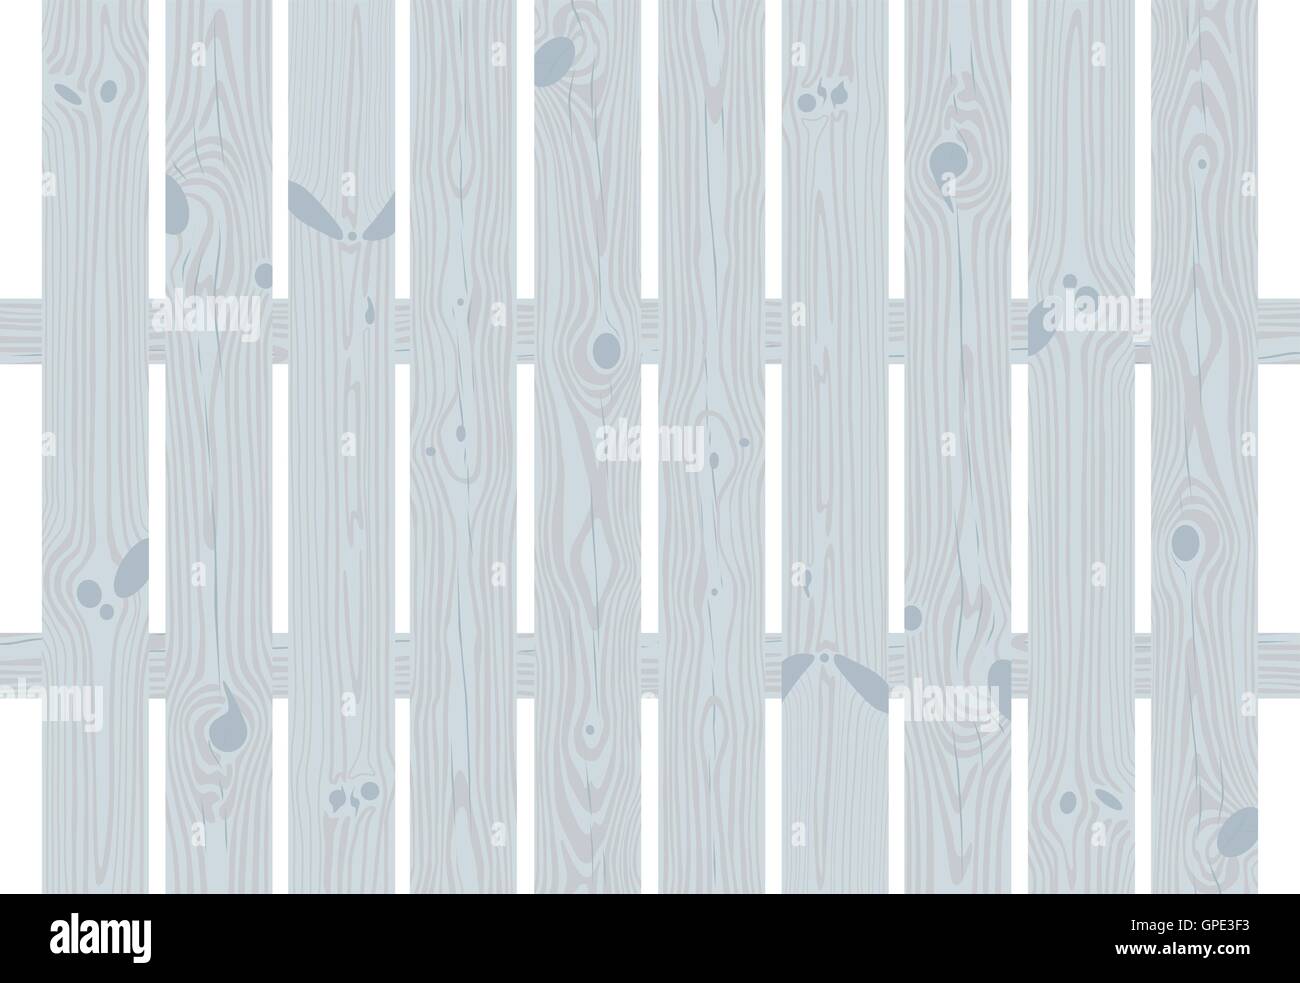 White wooden decorative cottage garden fence made of rectangular planks Stock Vector